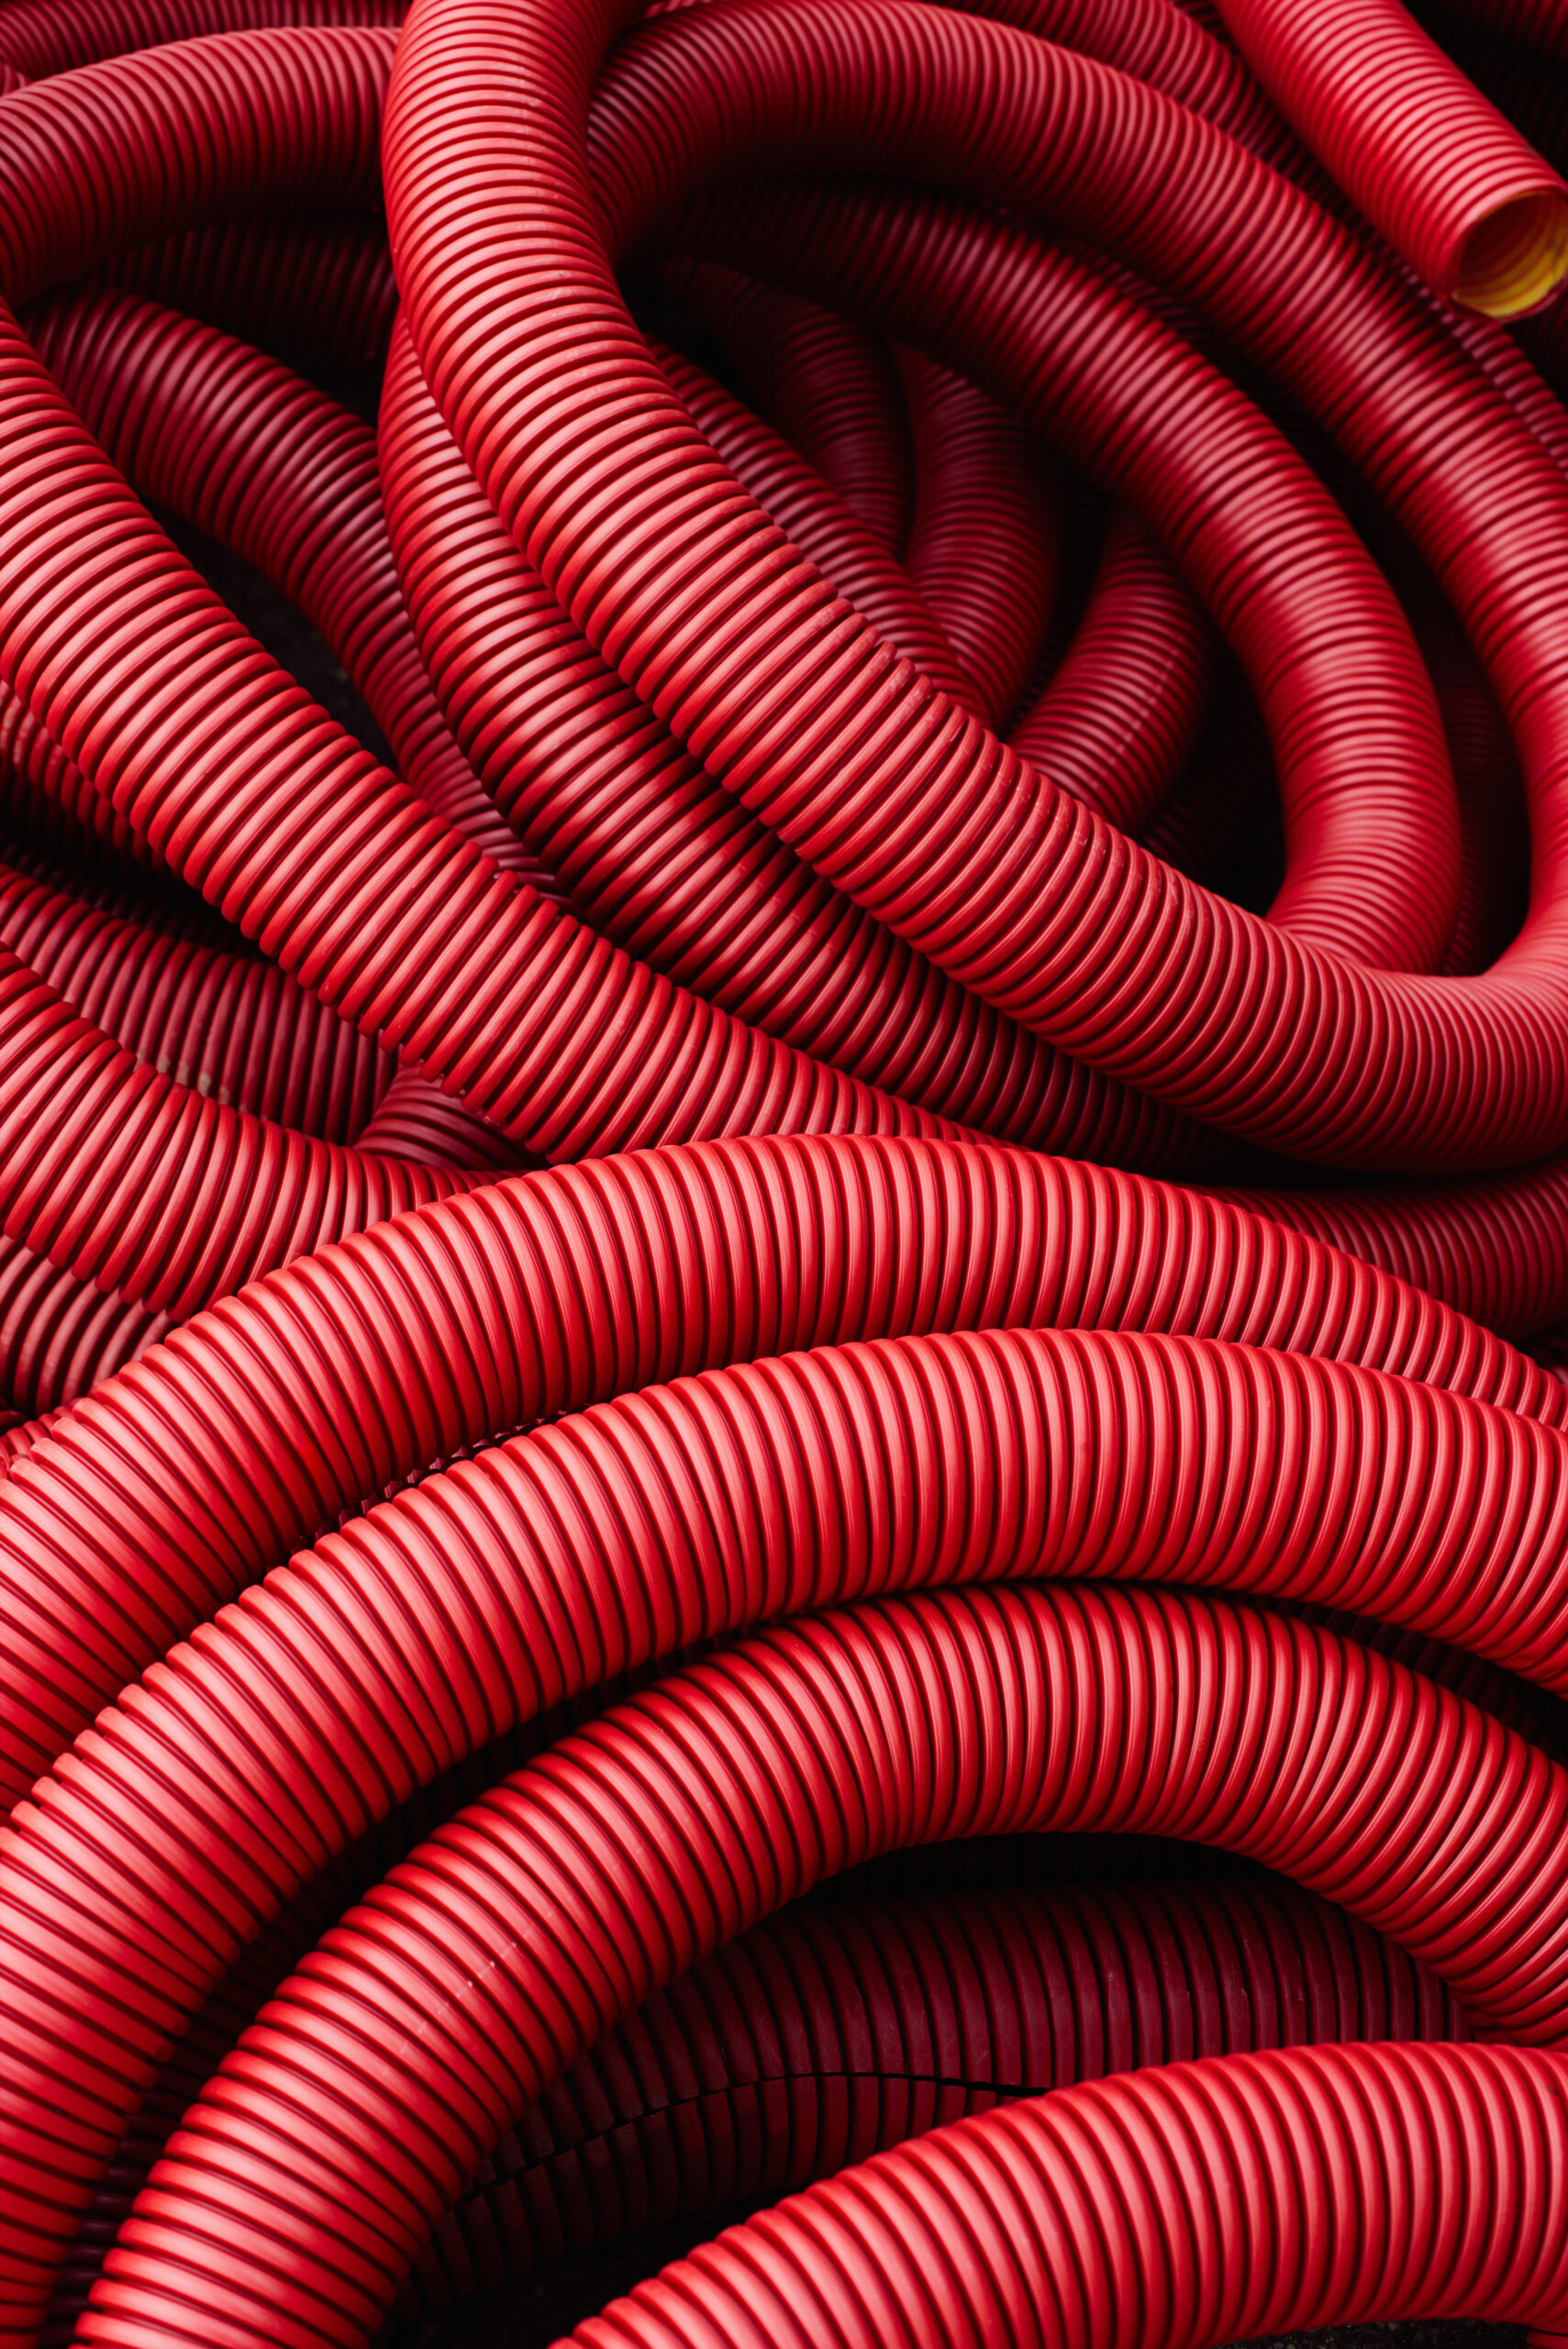 Industrial background - red plastic corrugated pipes